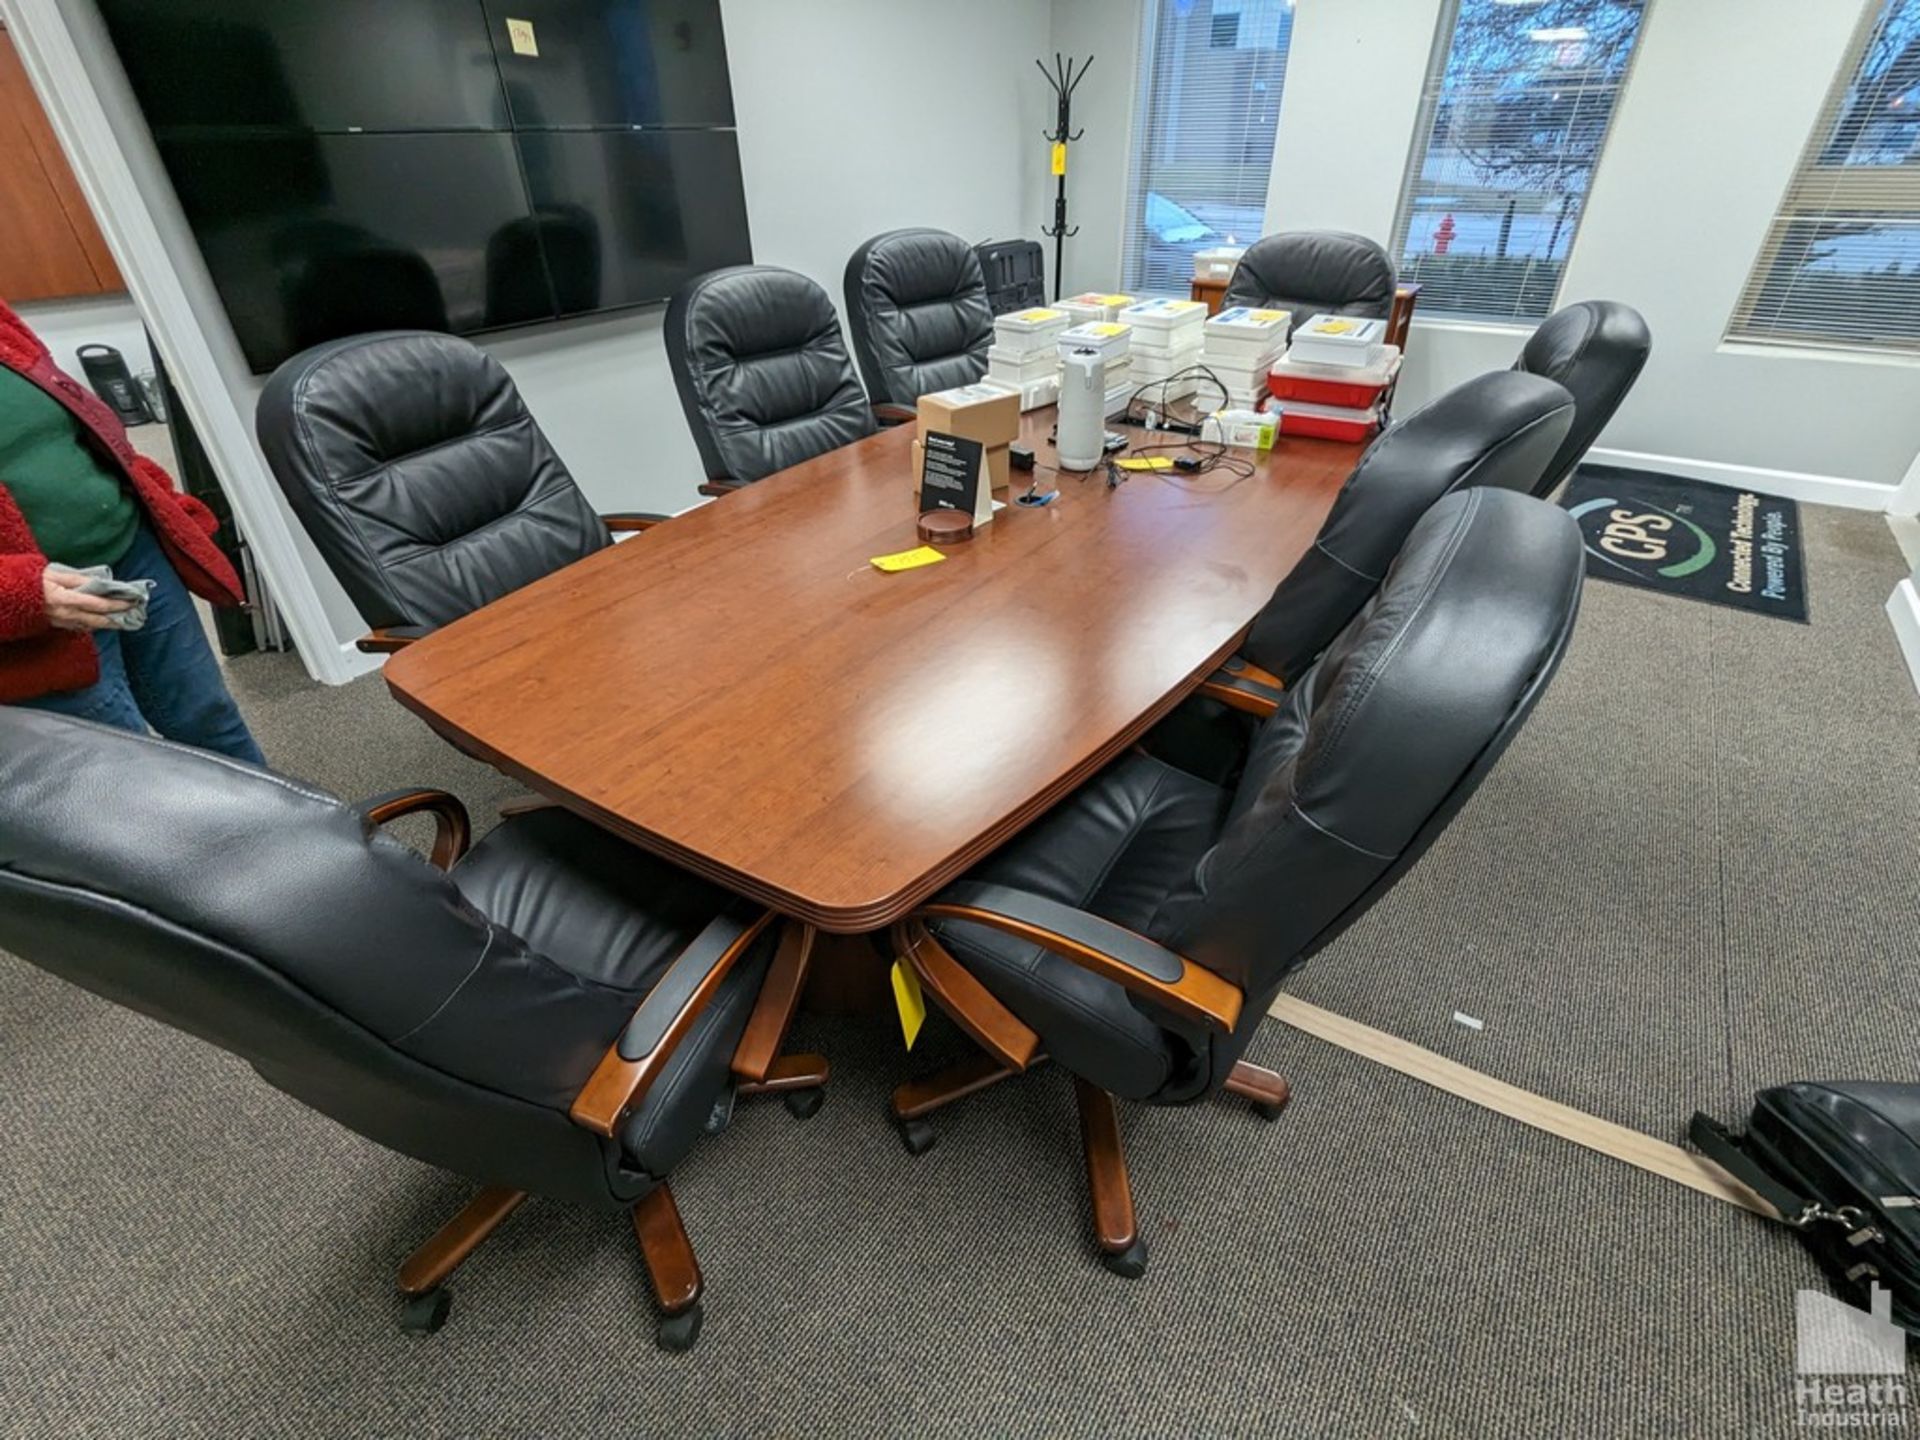 (8) EXECUTIVE CONFERENCE TABLE CHAIRS